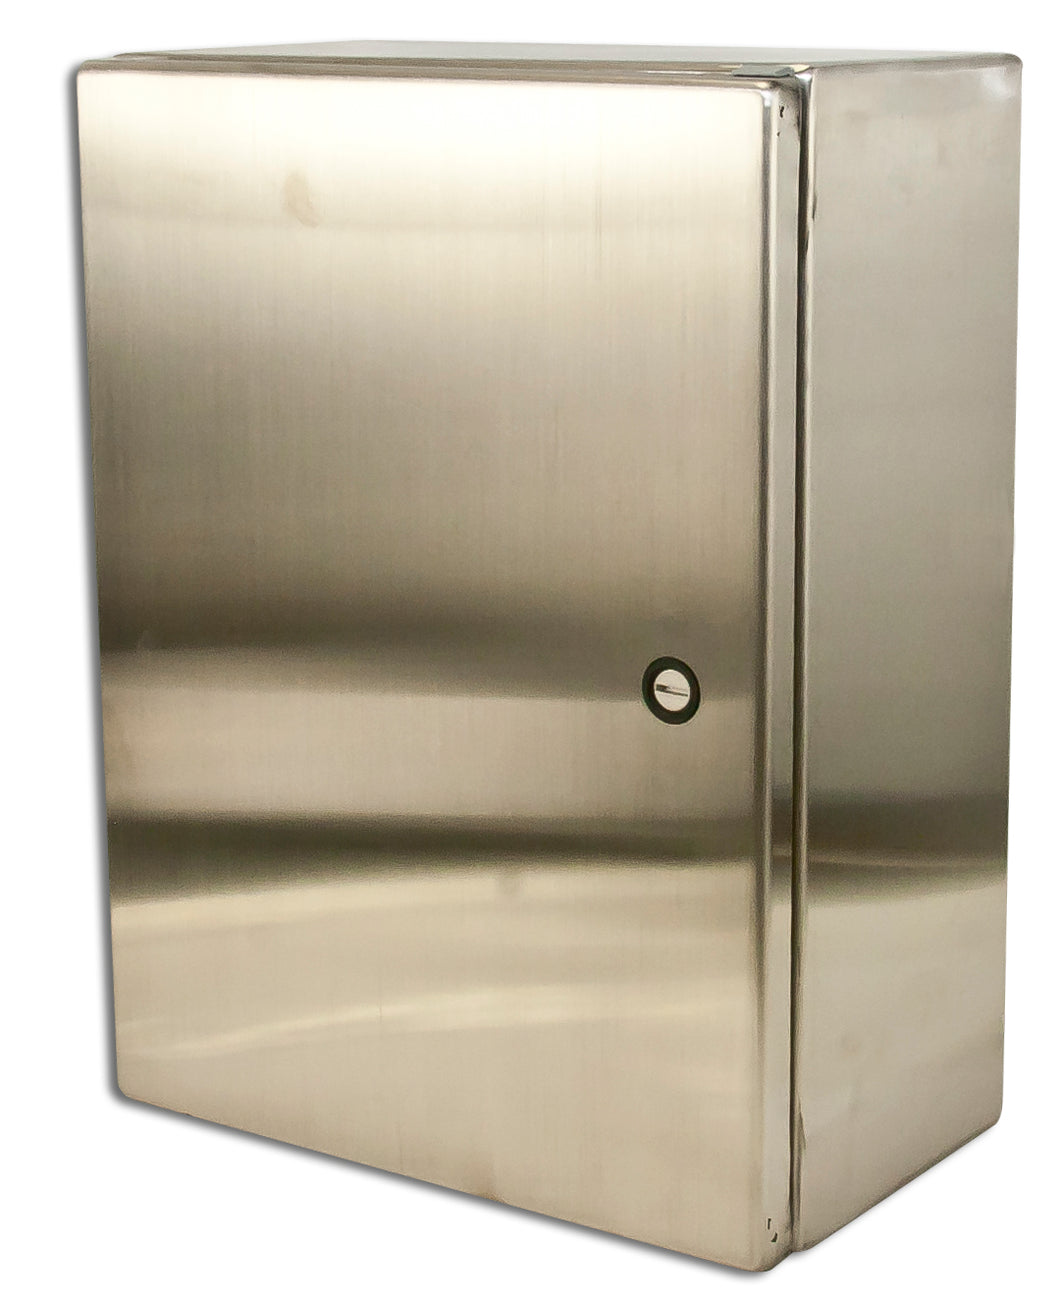 nVent Hoffman CSD24208SS Enclosure, NEMA 4X, Hinged Cover, Stainless Steel, 24